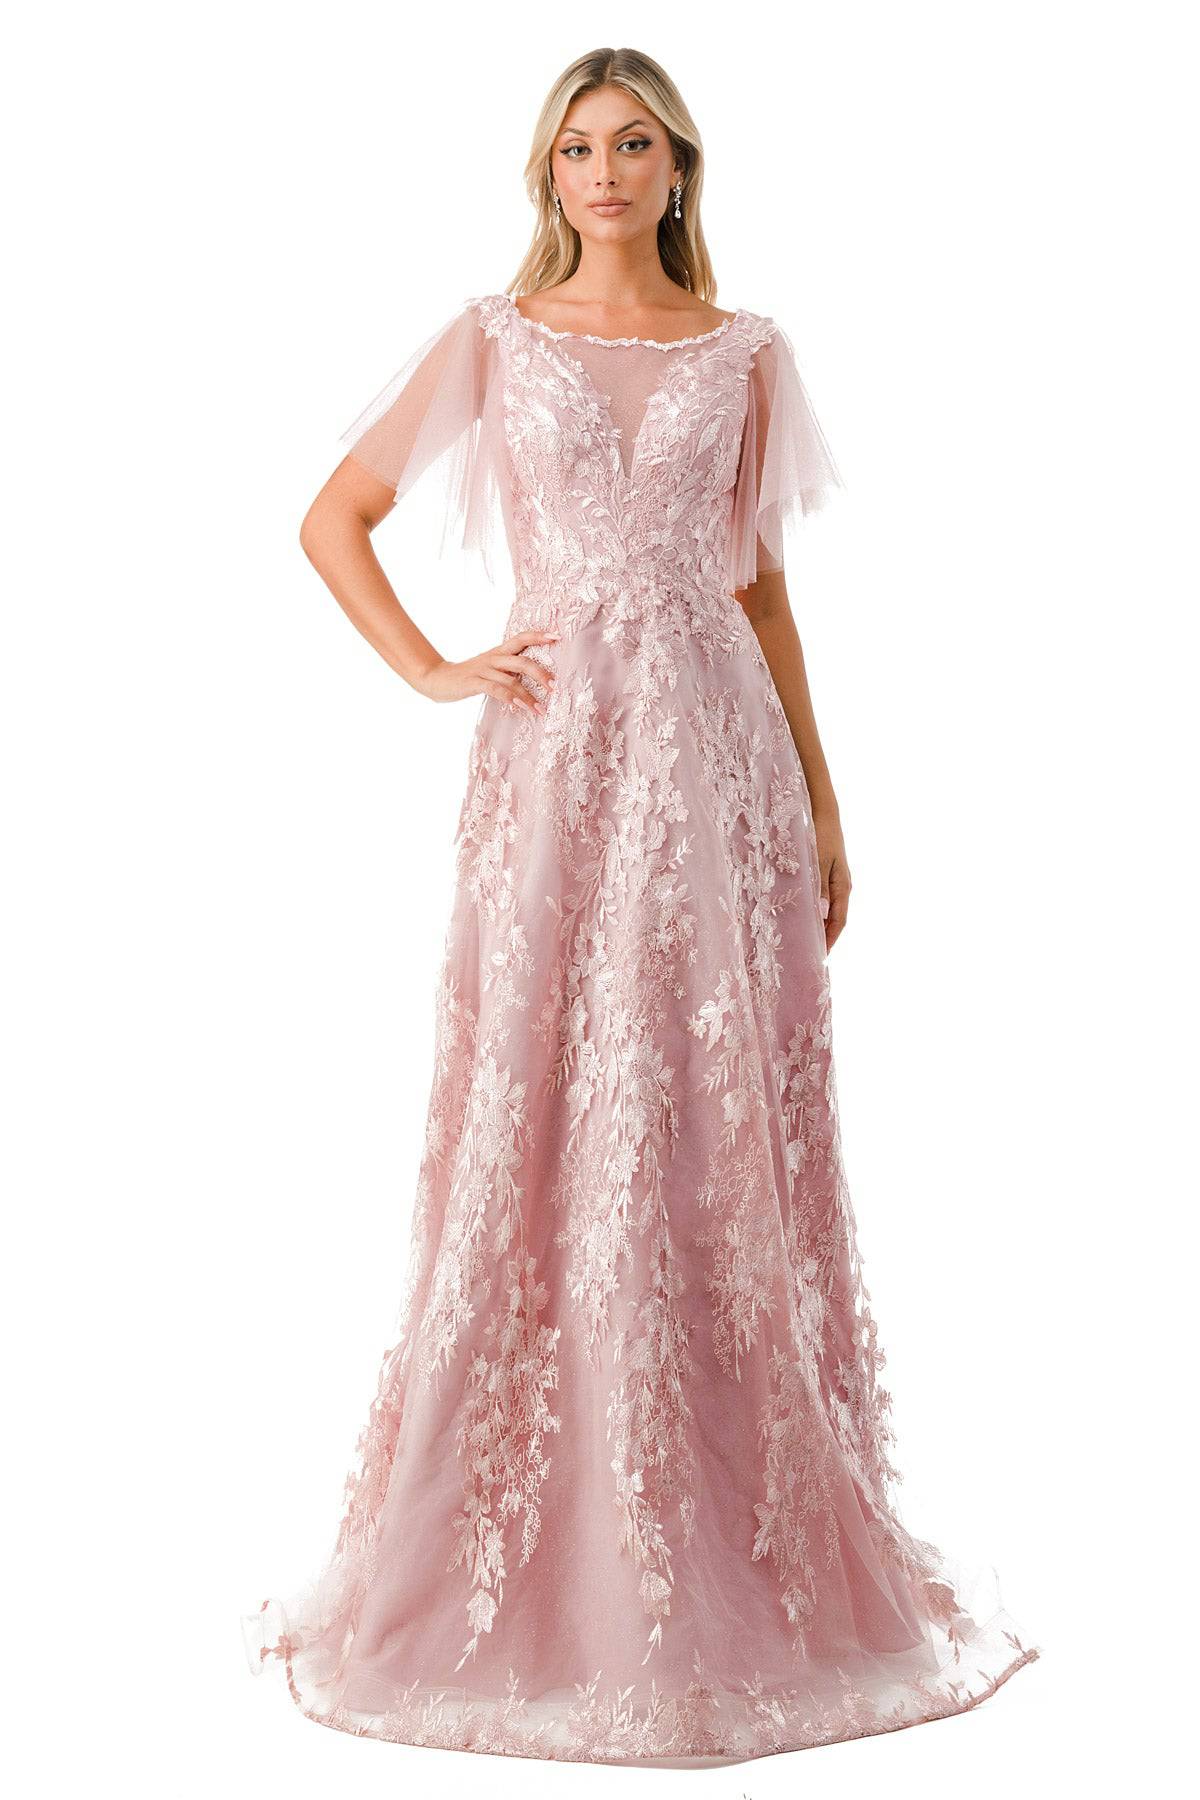 Aspeed M2818M Shimmering Mauve Floral Gown - NORMA REED